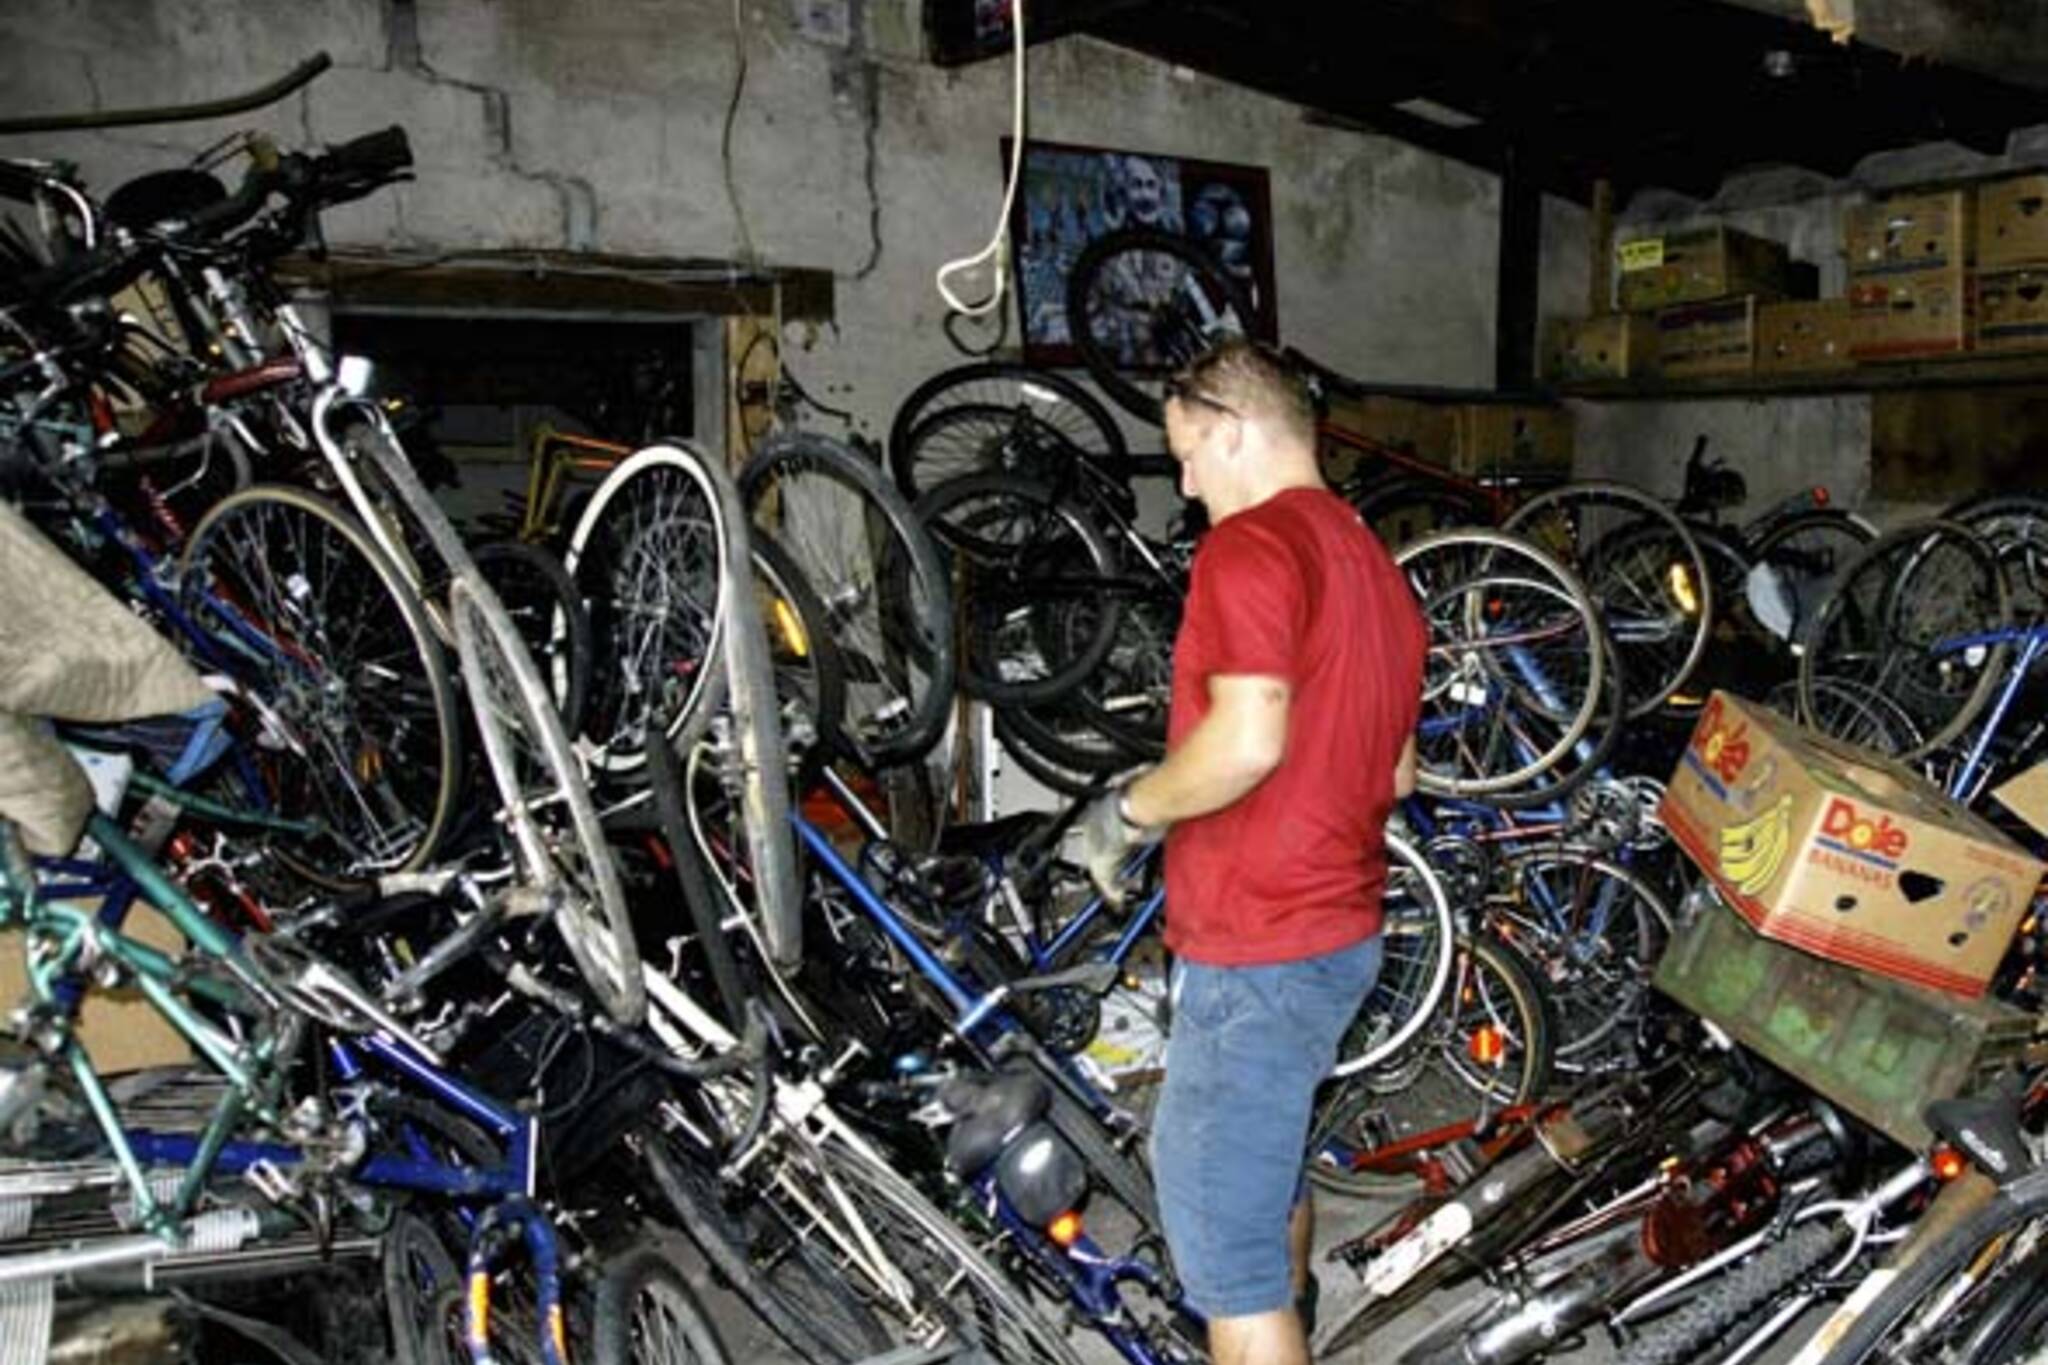 More stolen bikes are uncovered in a Parkdale garage